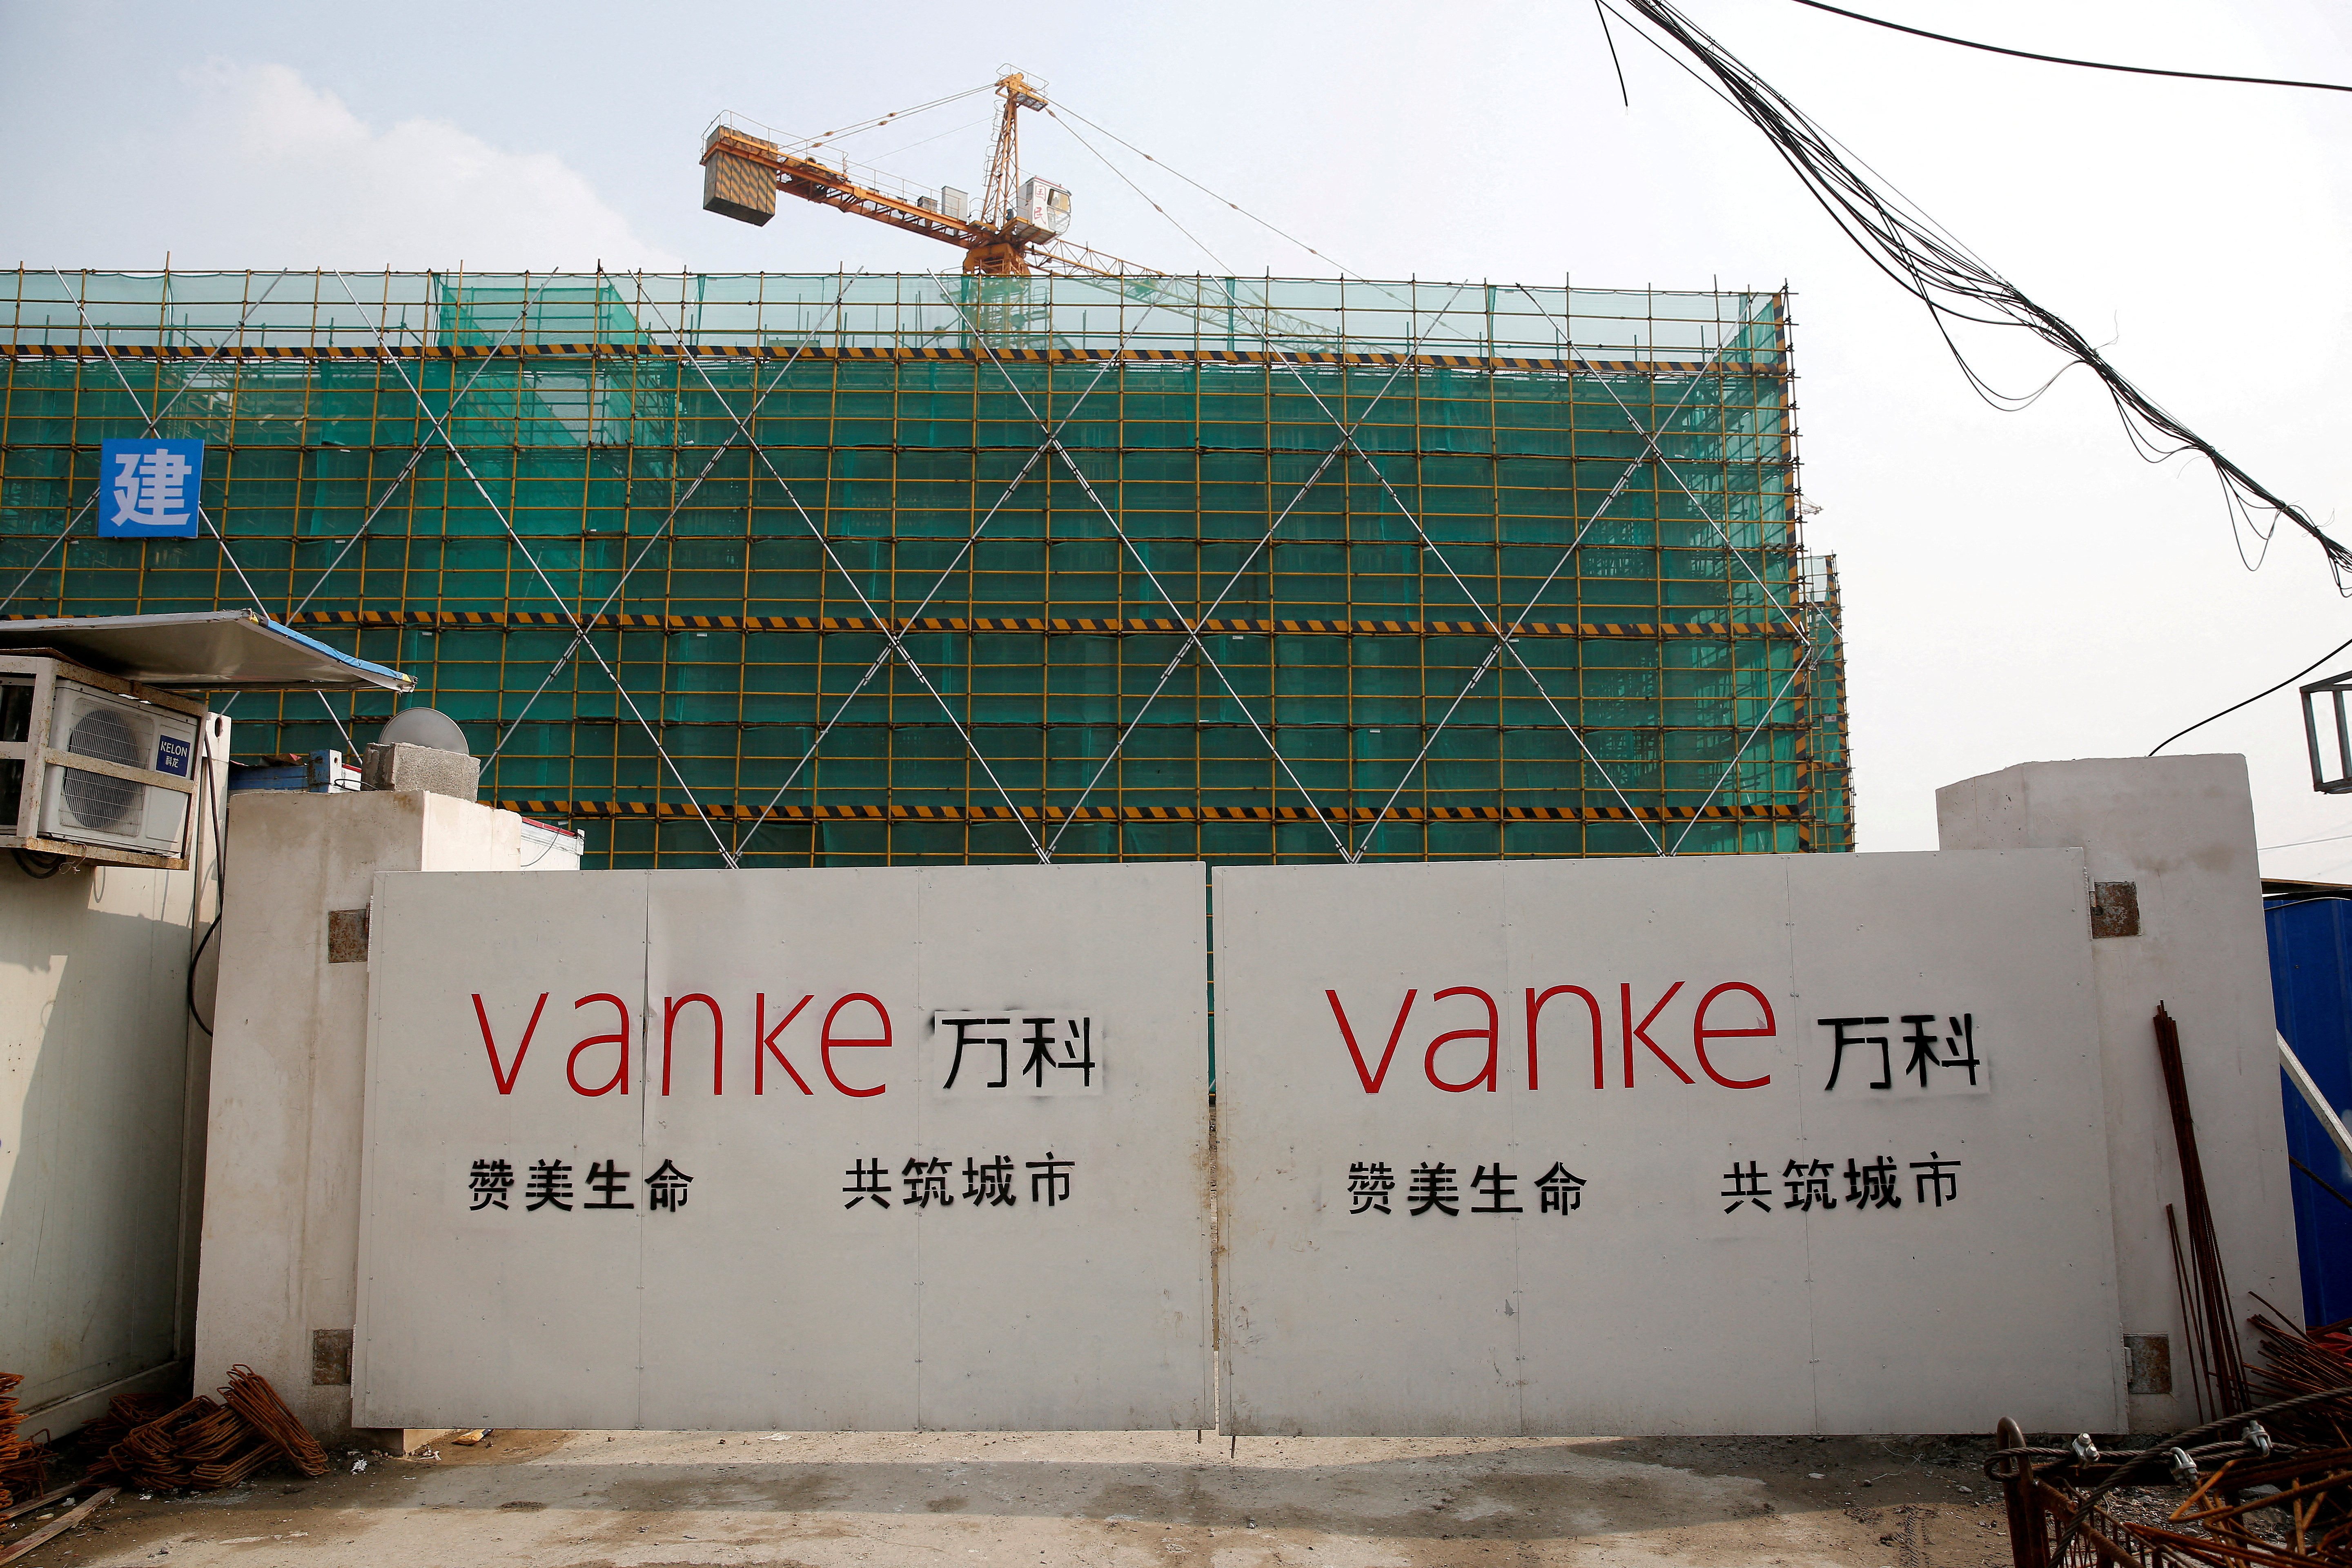 The logo of property developer China Vanke is seen on gates at a construction site in Shanghai